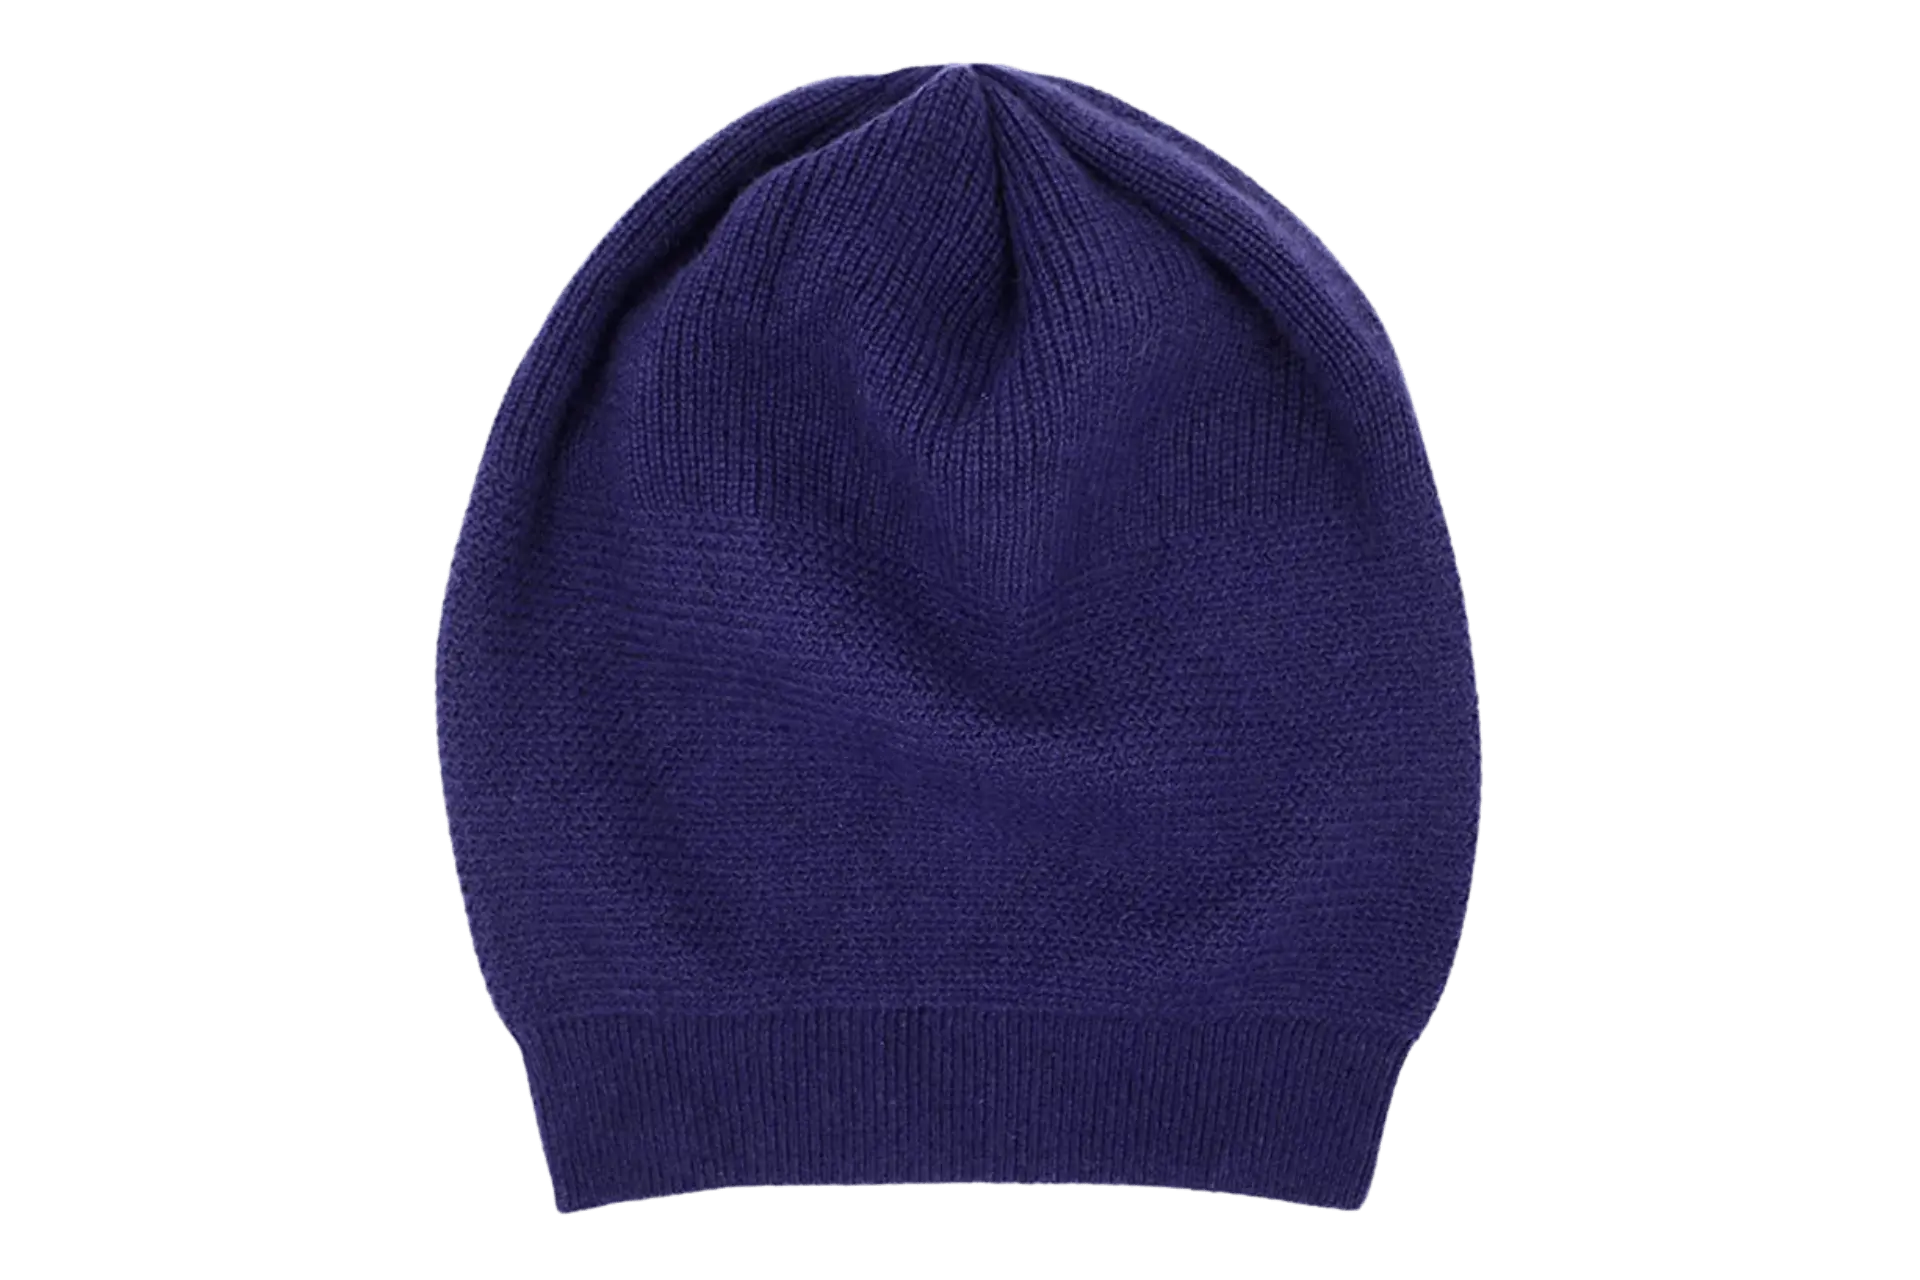 Best Cashmere Beanie in 2023 - [Top 15 Options]